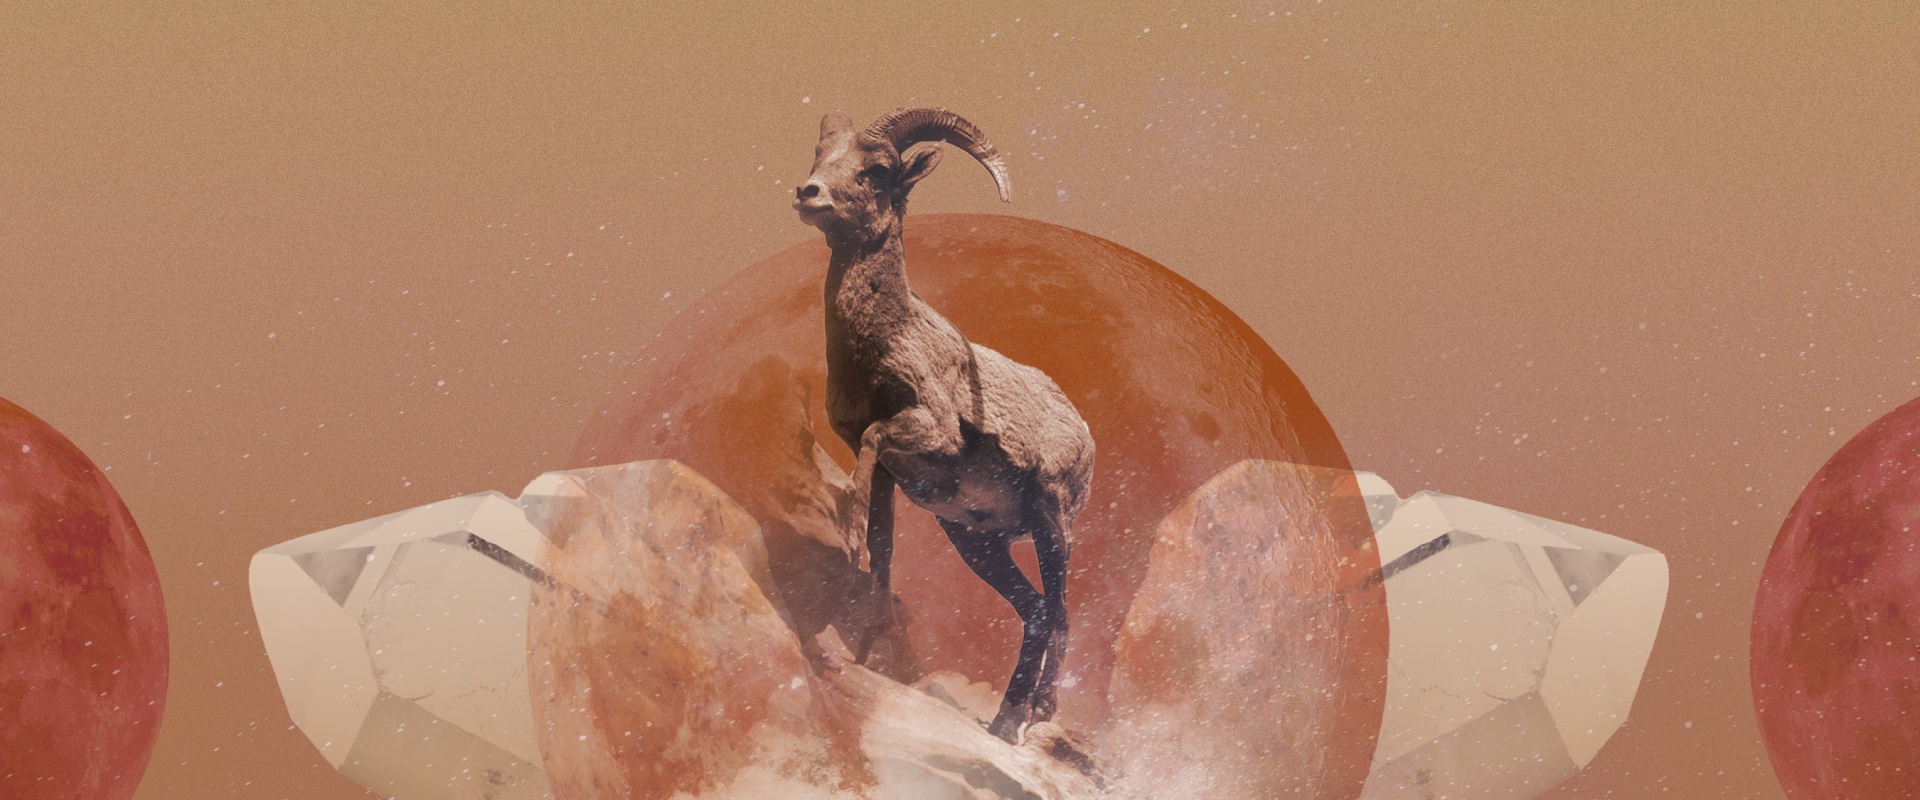 Aries Monthly Horoscope: What to Expect